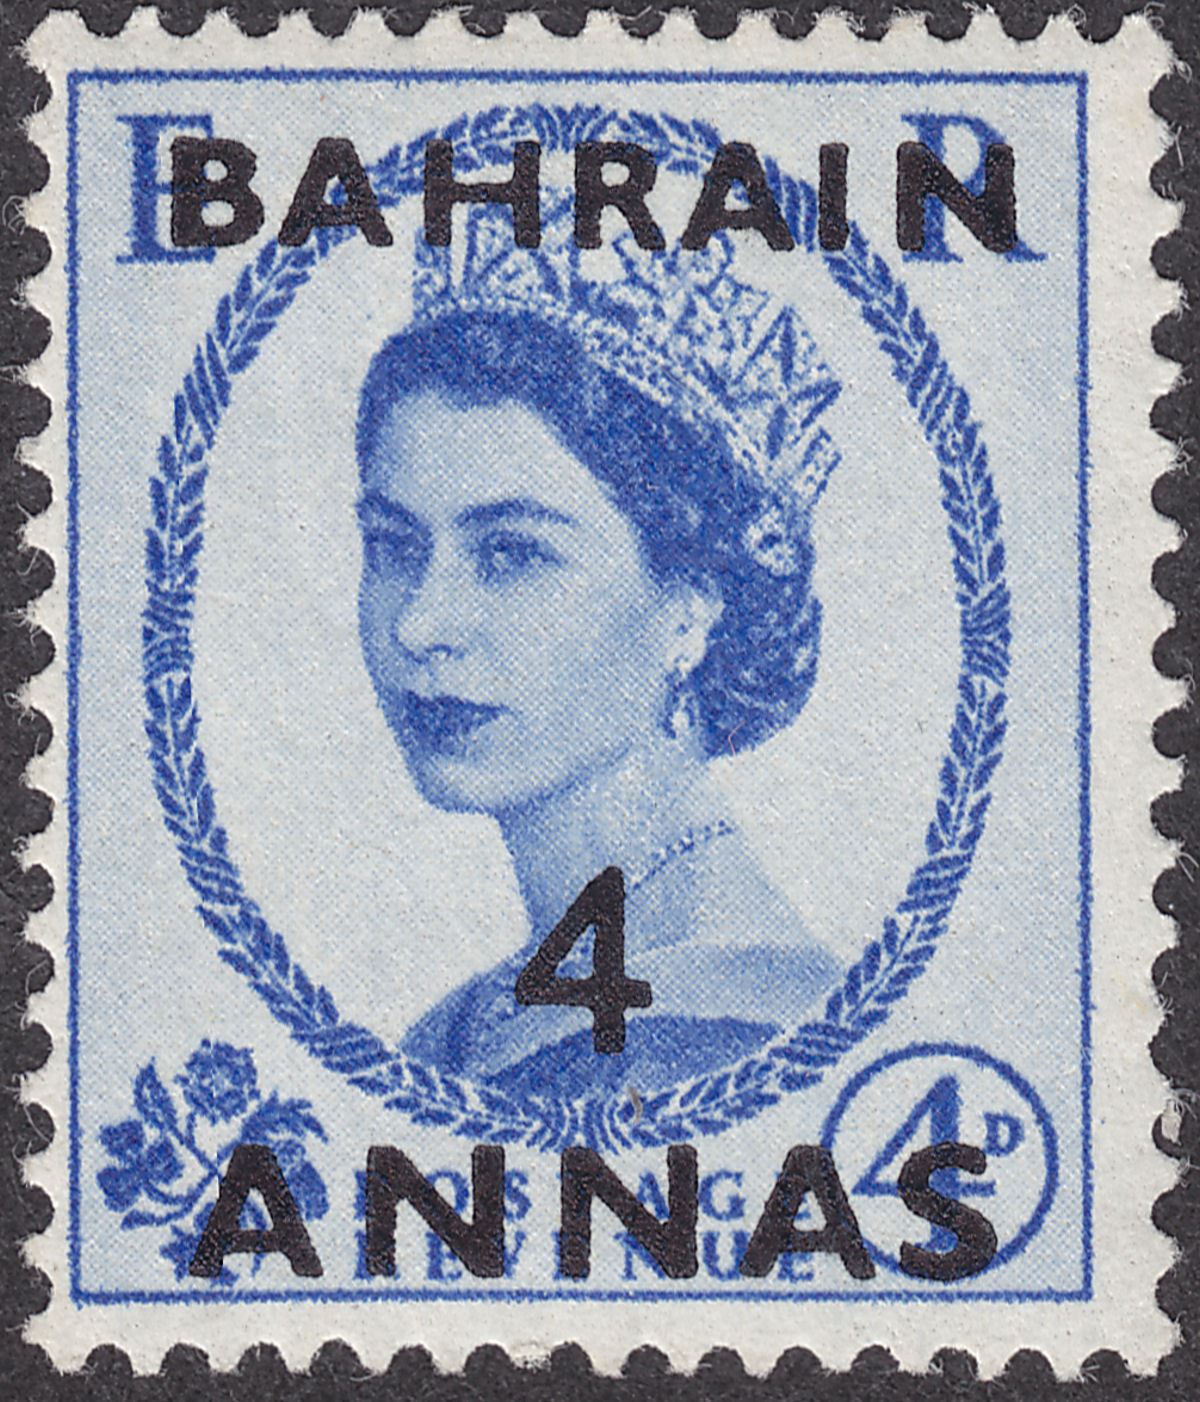 Bahrain 1956 QEII 4a Surcharge on 4d Ultramarine Retouch to Neck Variety Mint